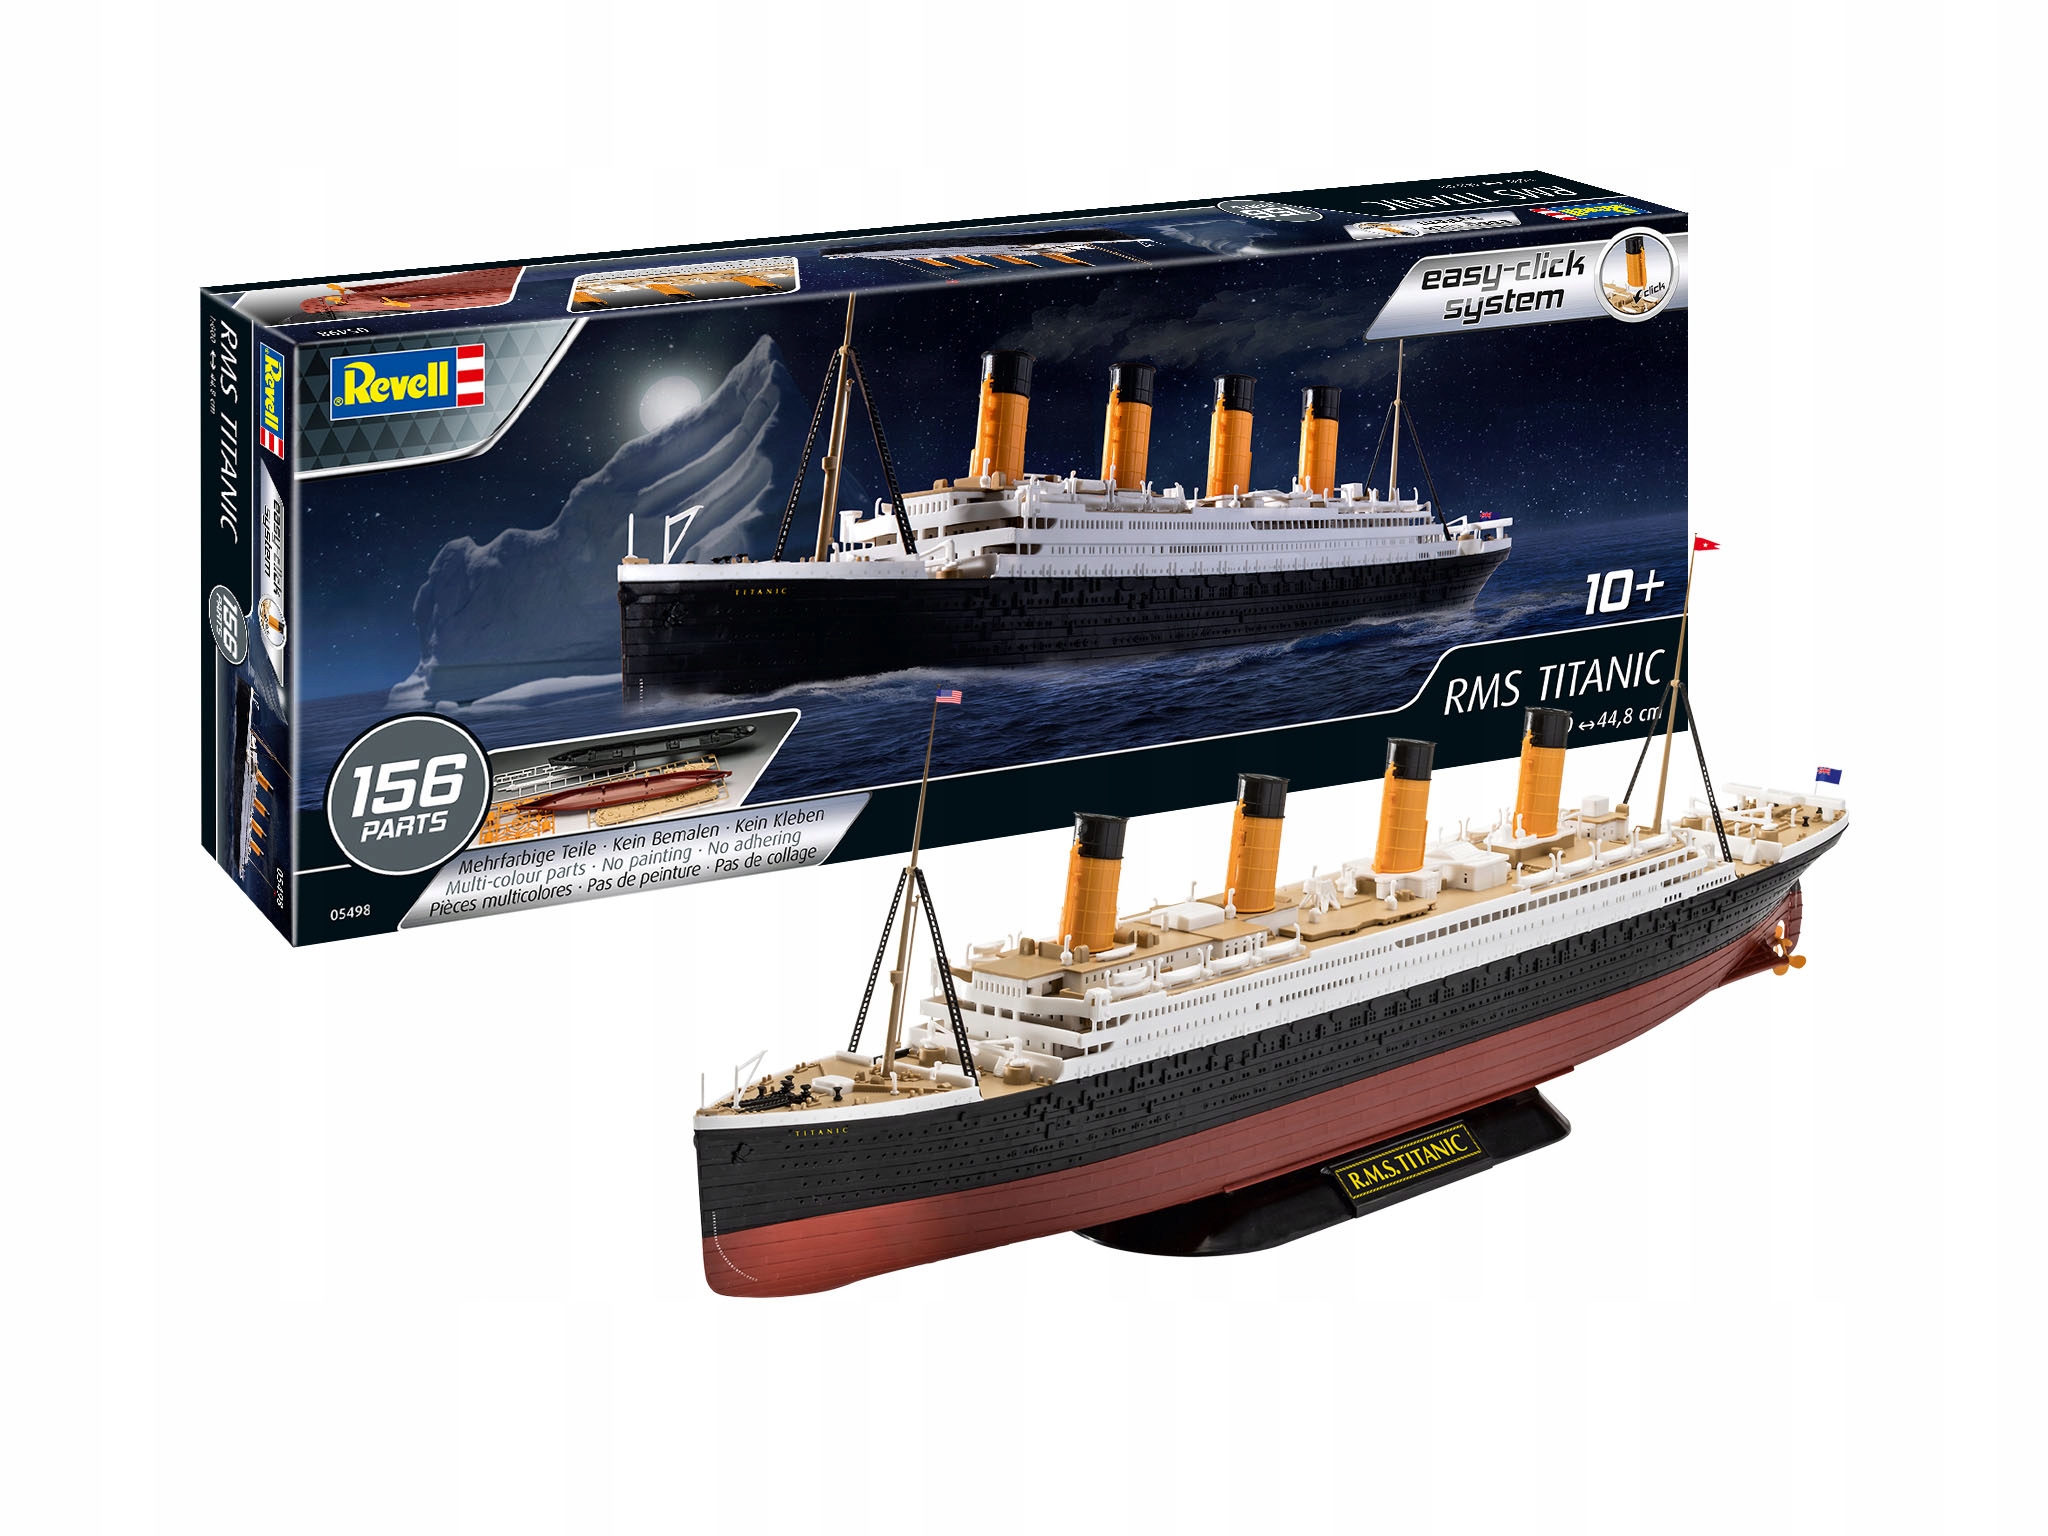 EASY CLICK REVELL 1:600 RMS TITANIC 05498